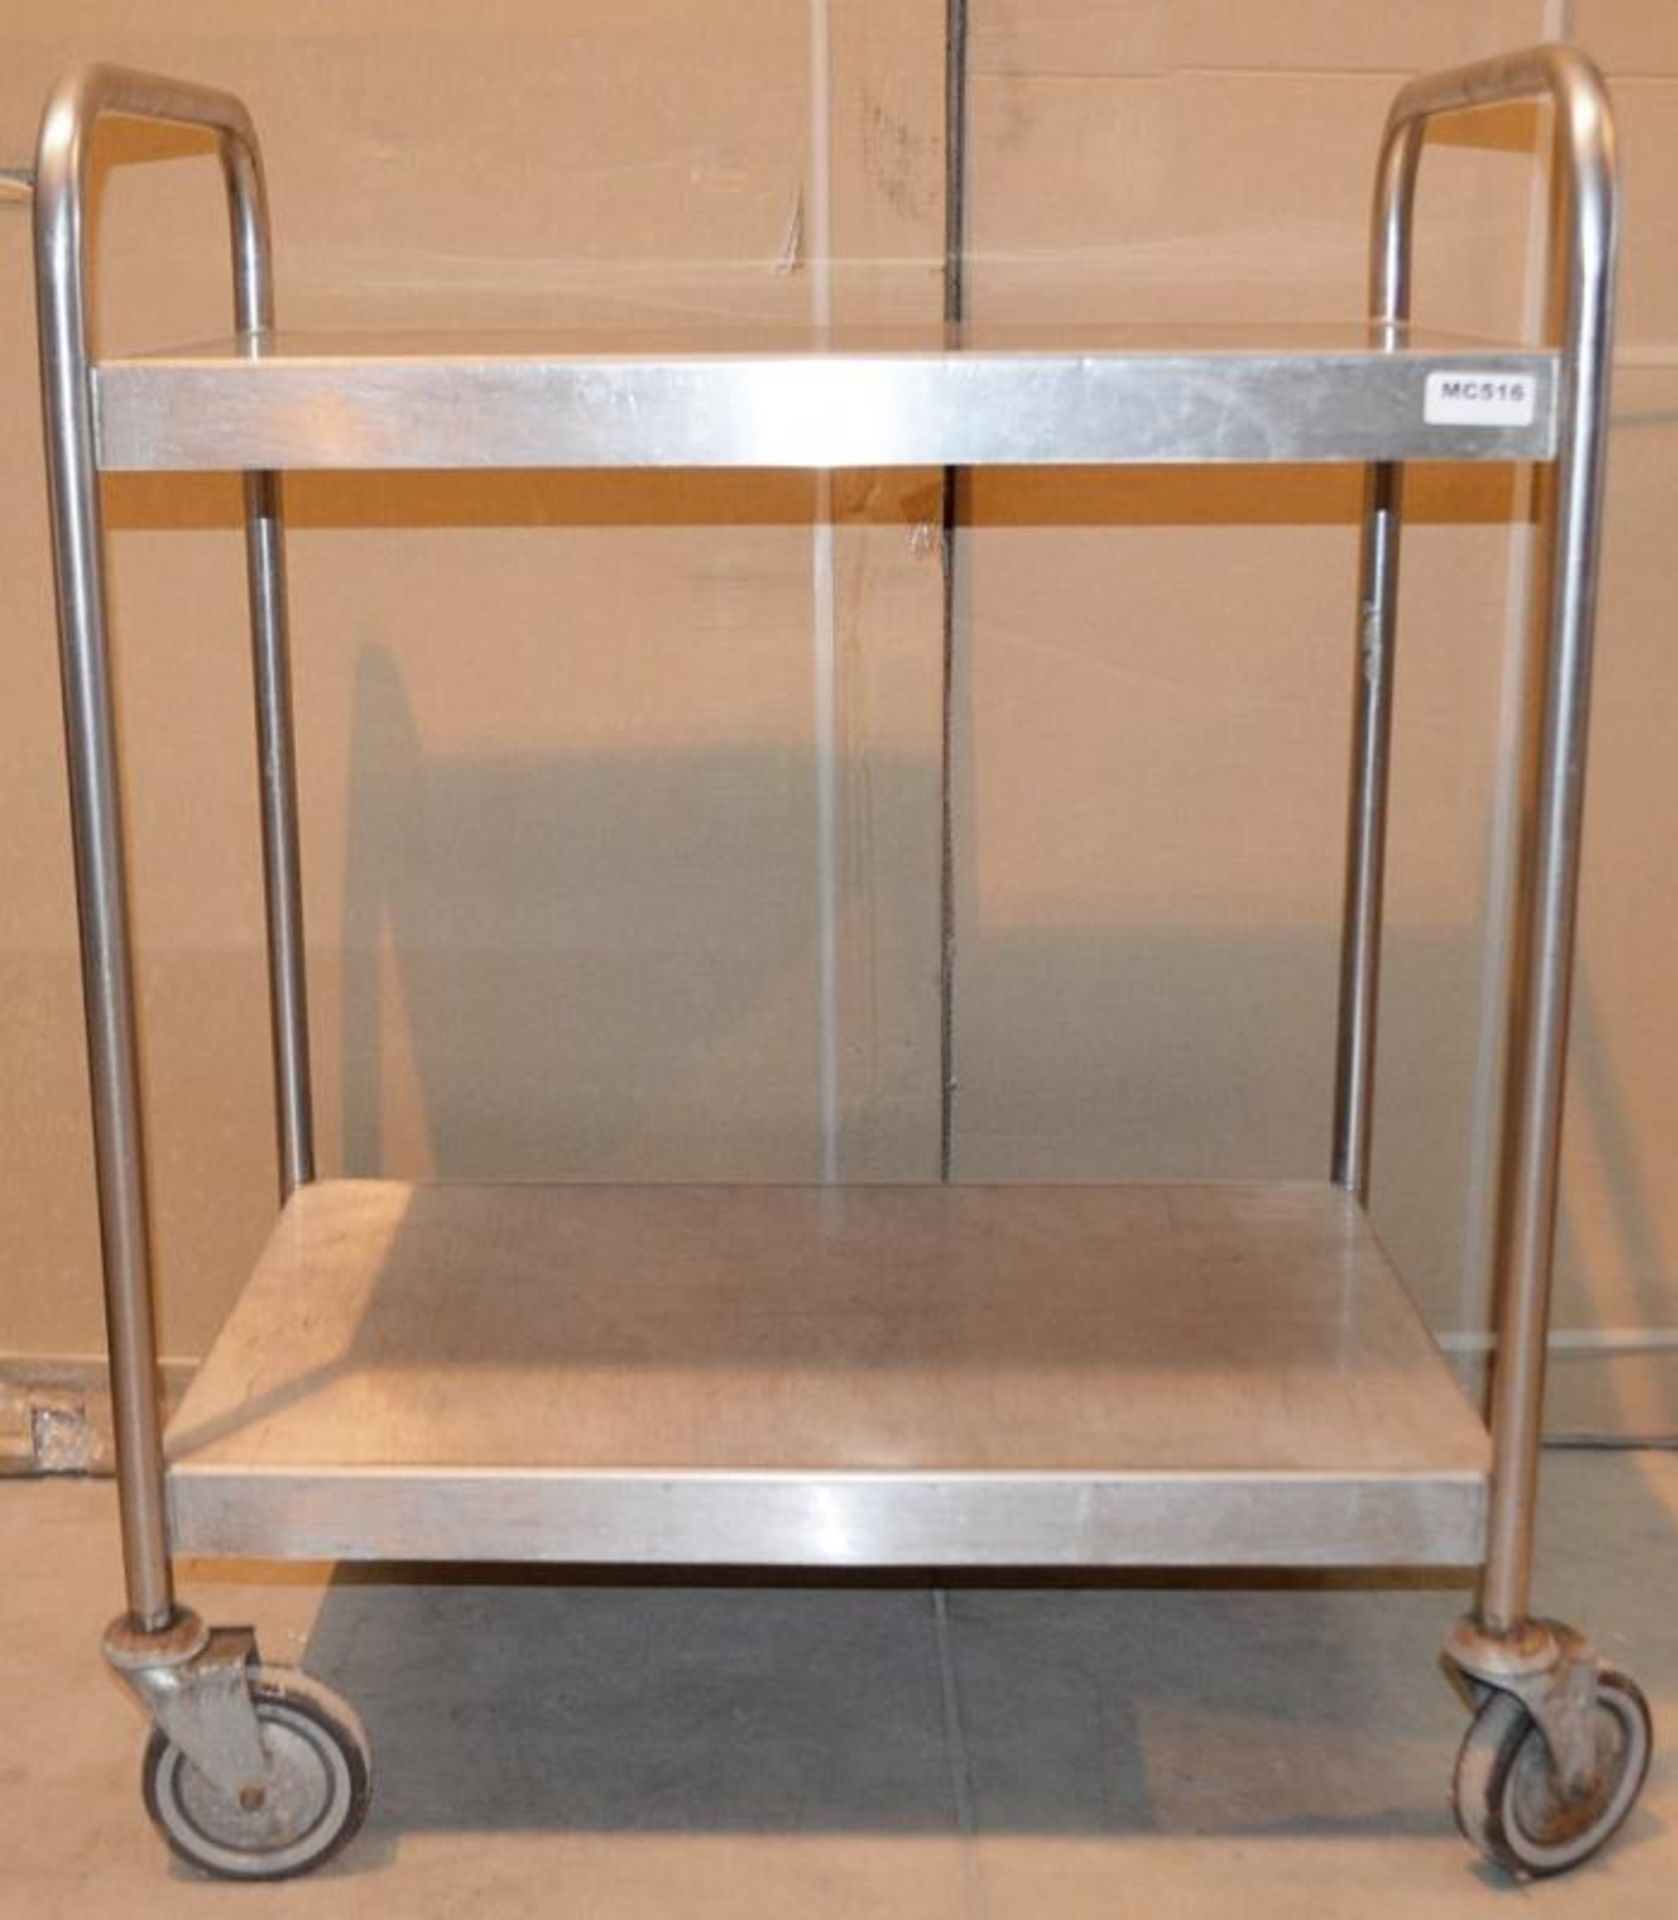 1 x Stainless Steel Commercial Kitchen 2-Teir Trolley On Castors - Dimensions: W74 x D48 x H95cm - V - Image 4 of 4